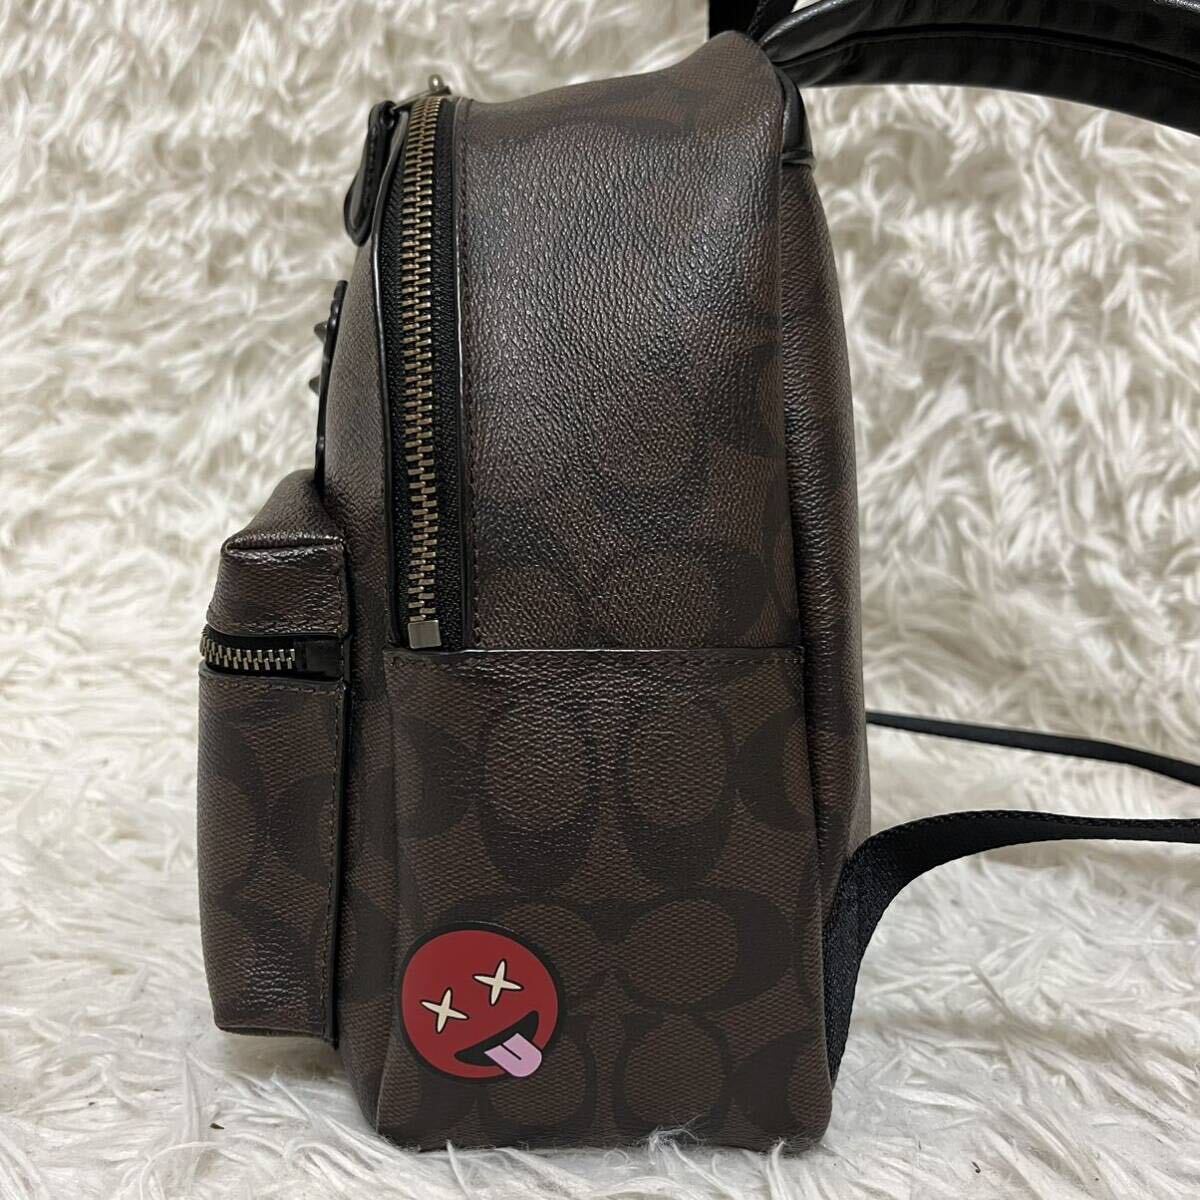  rare ultra rare beautiful goods COACH Coach signature rucksack backpack total pattern badge up like commuting going to school Brown tea color leather 